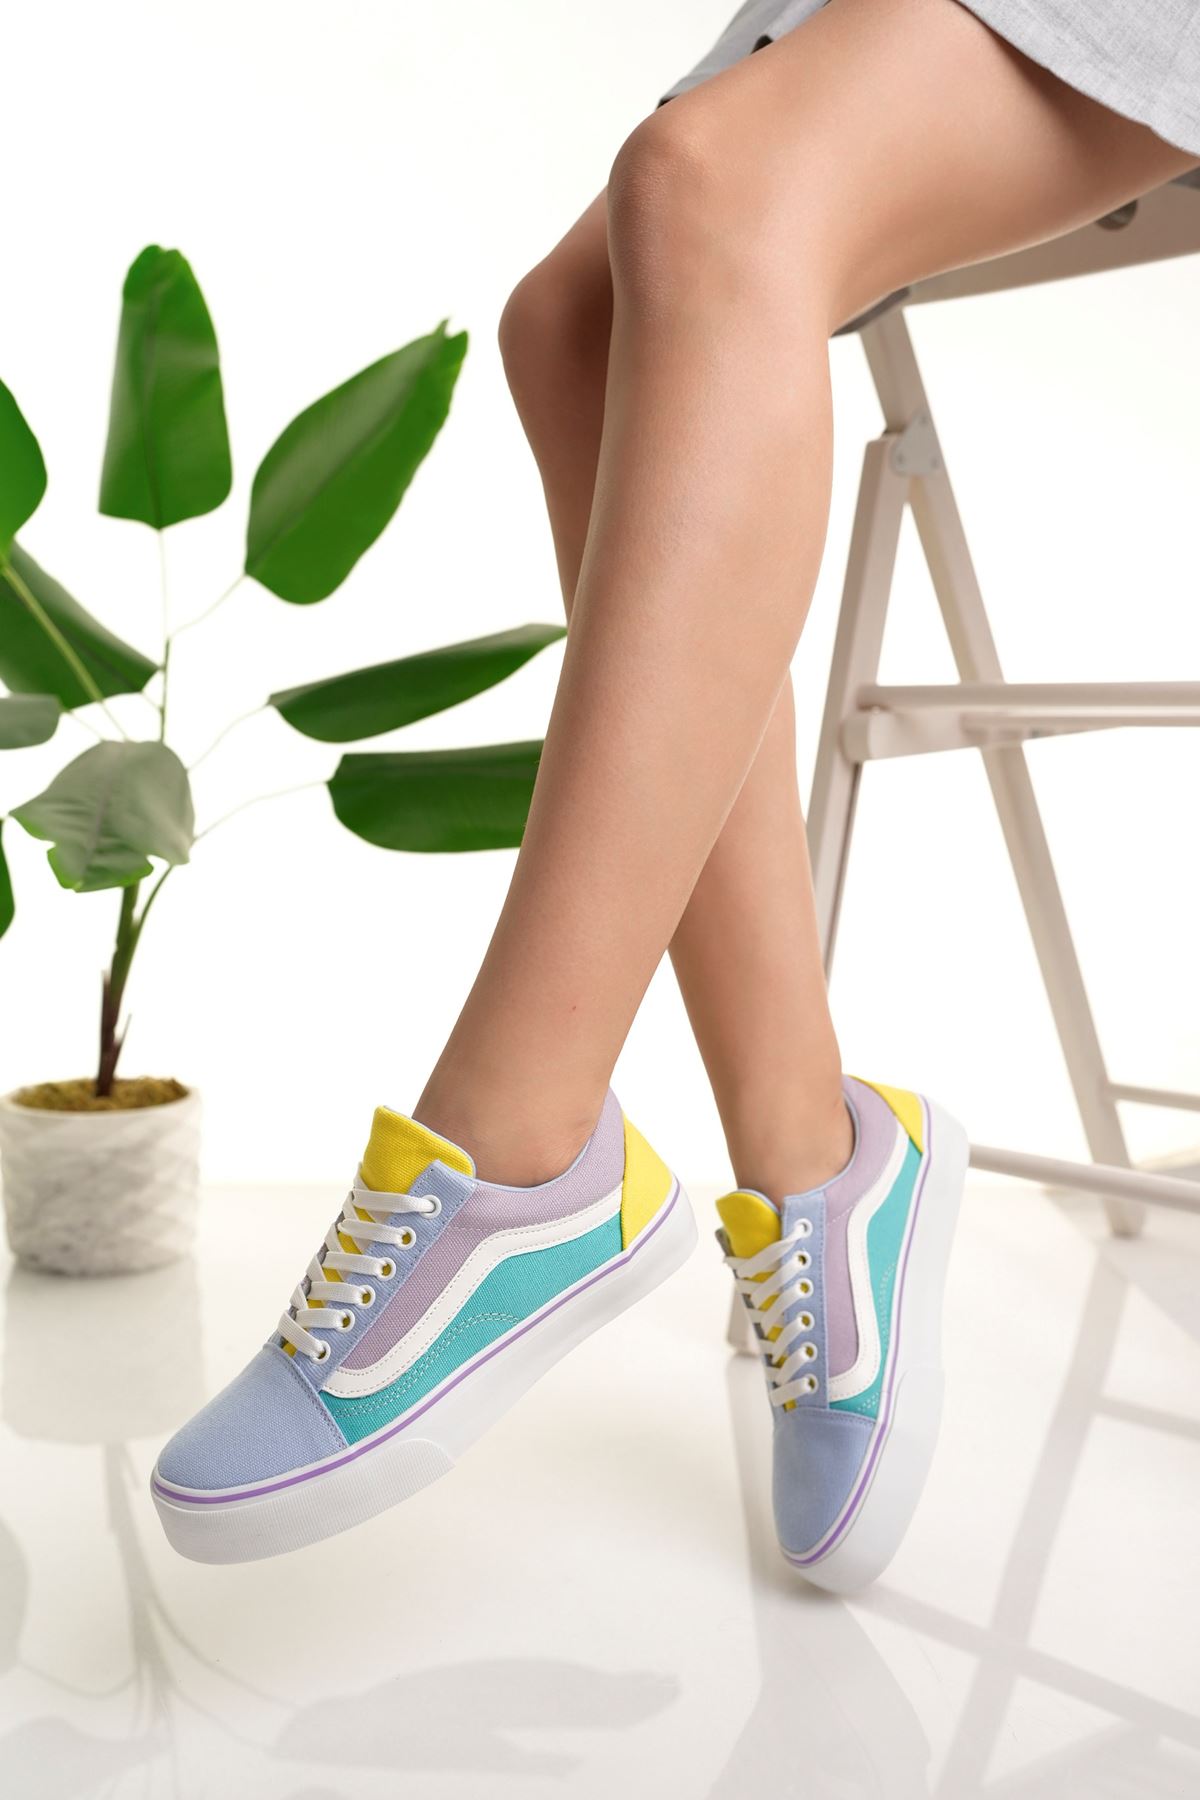 Lace-up Lilac Yellow Garnished Women's Sneakers